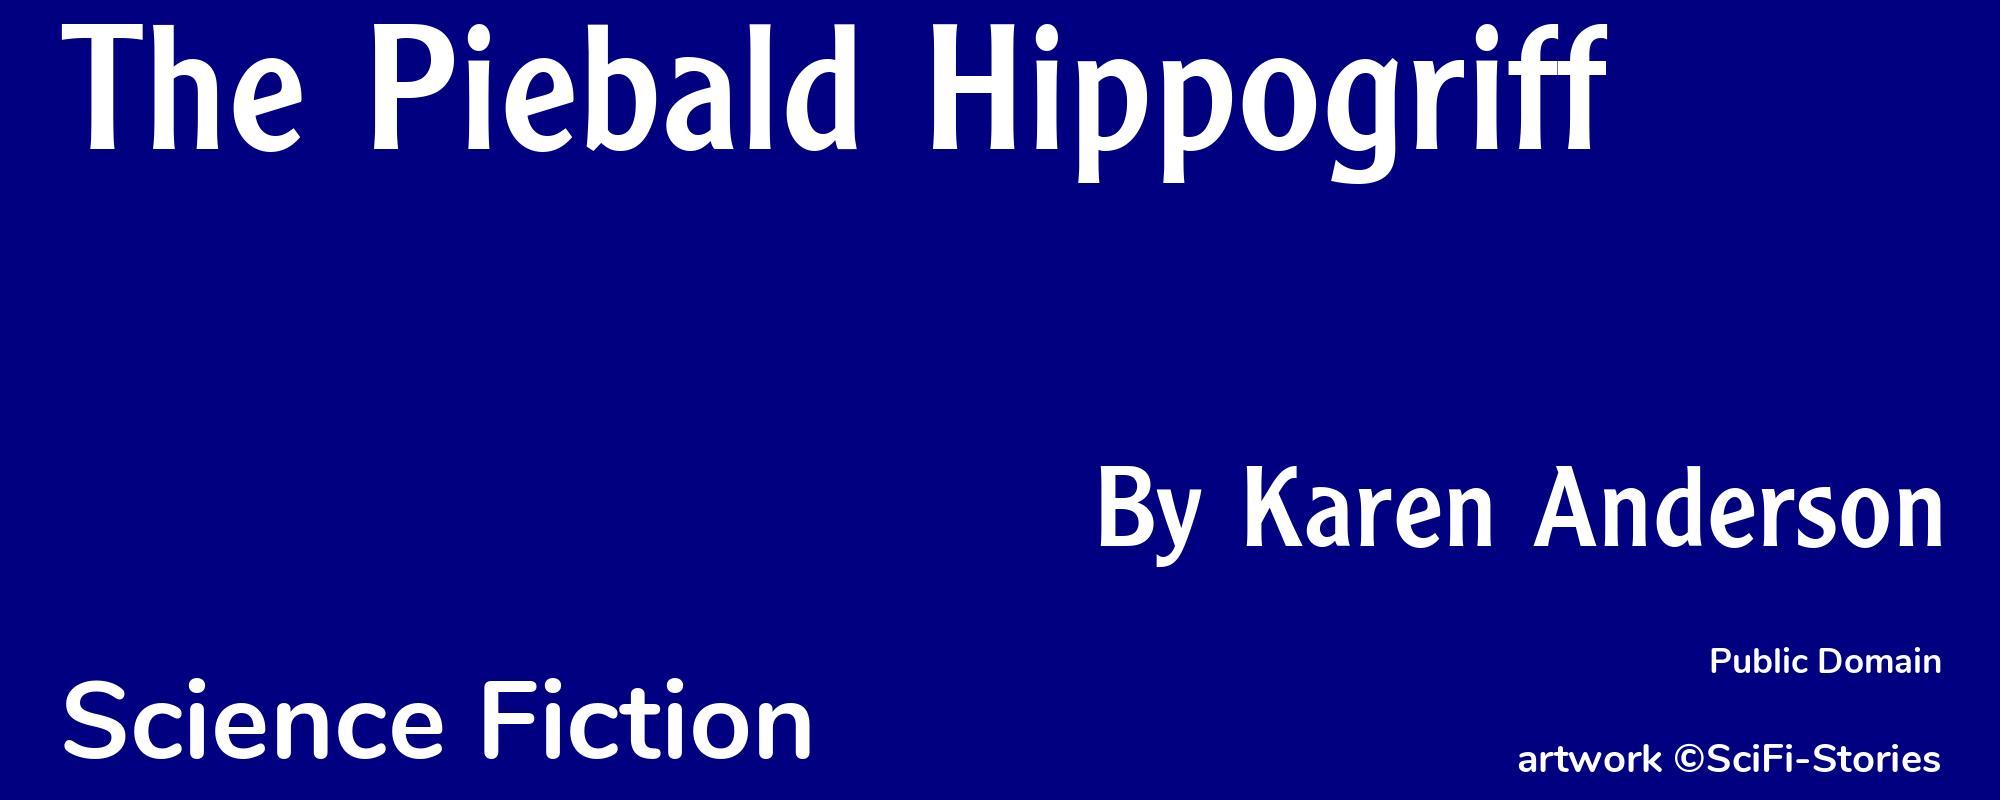 The Piebald Hippogriff - Cover